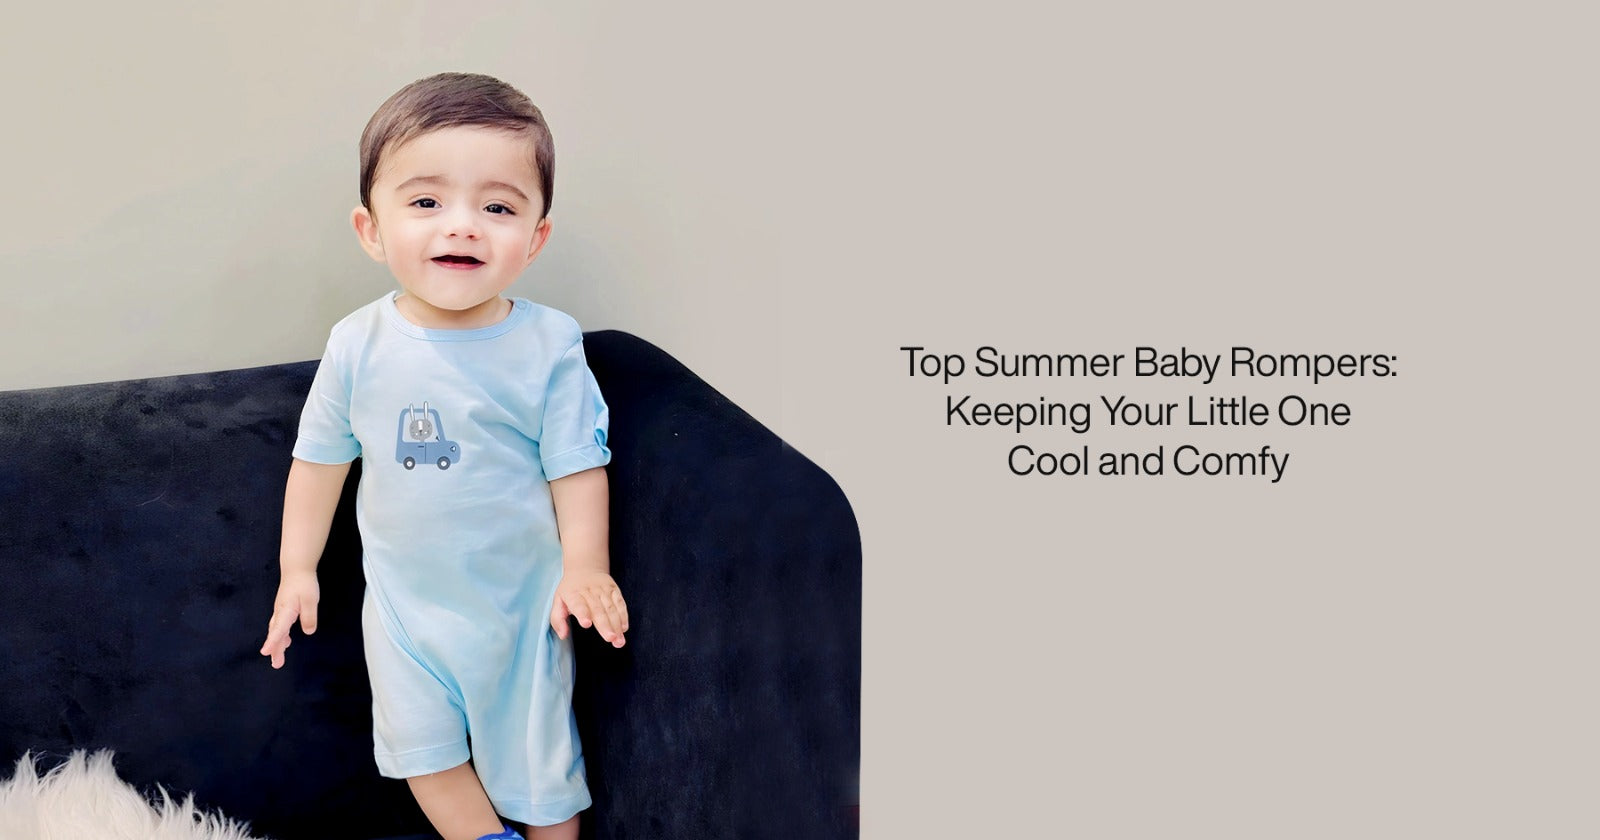 Top Summer Baby Rompers: Keeping Your Little One Cool and Comfy